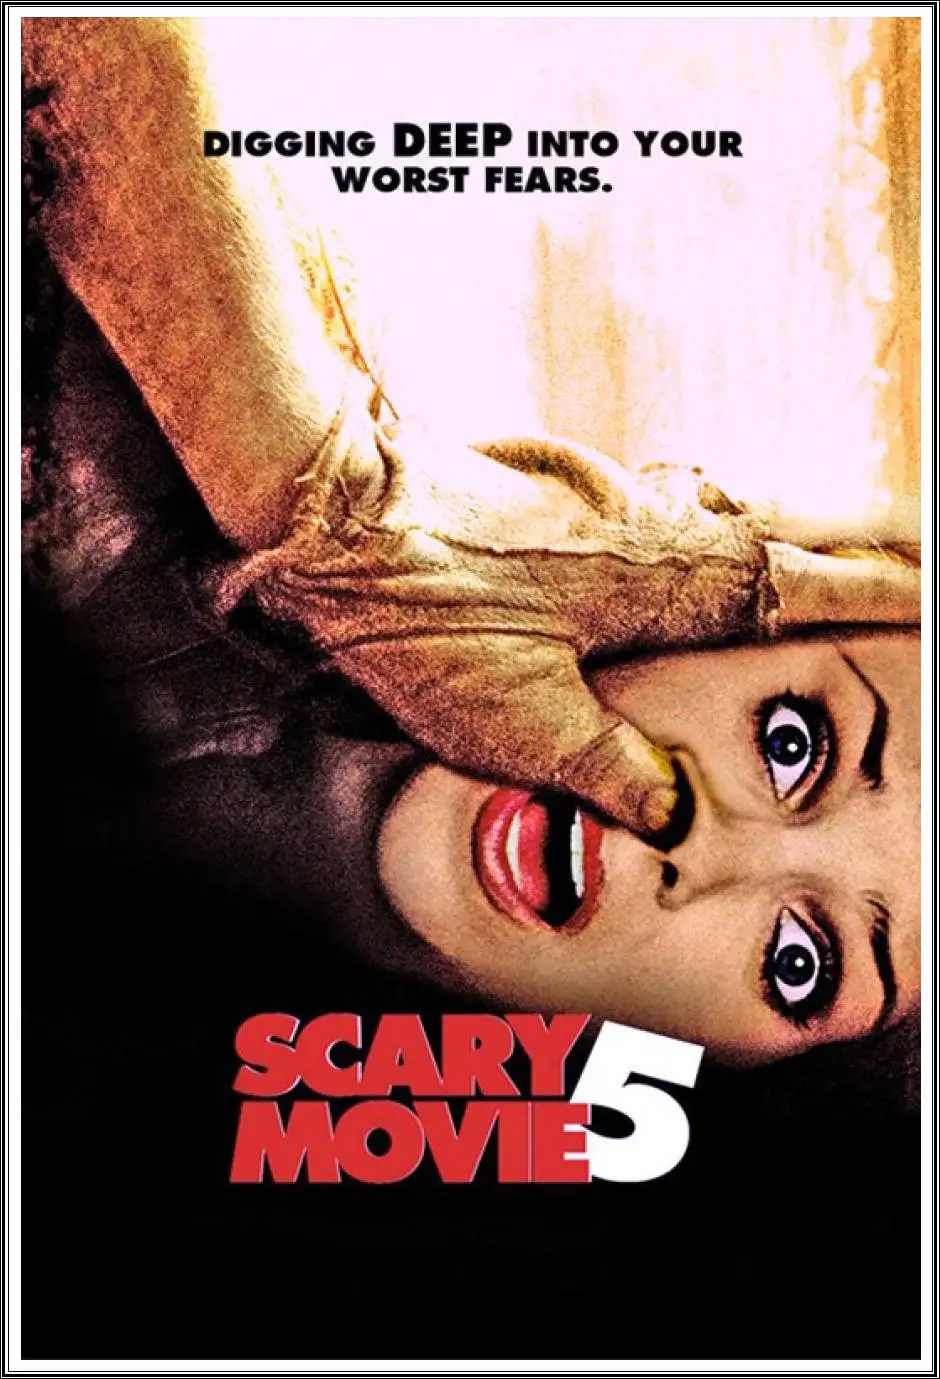 Scary Movie 5 (2013) Poster